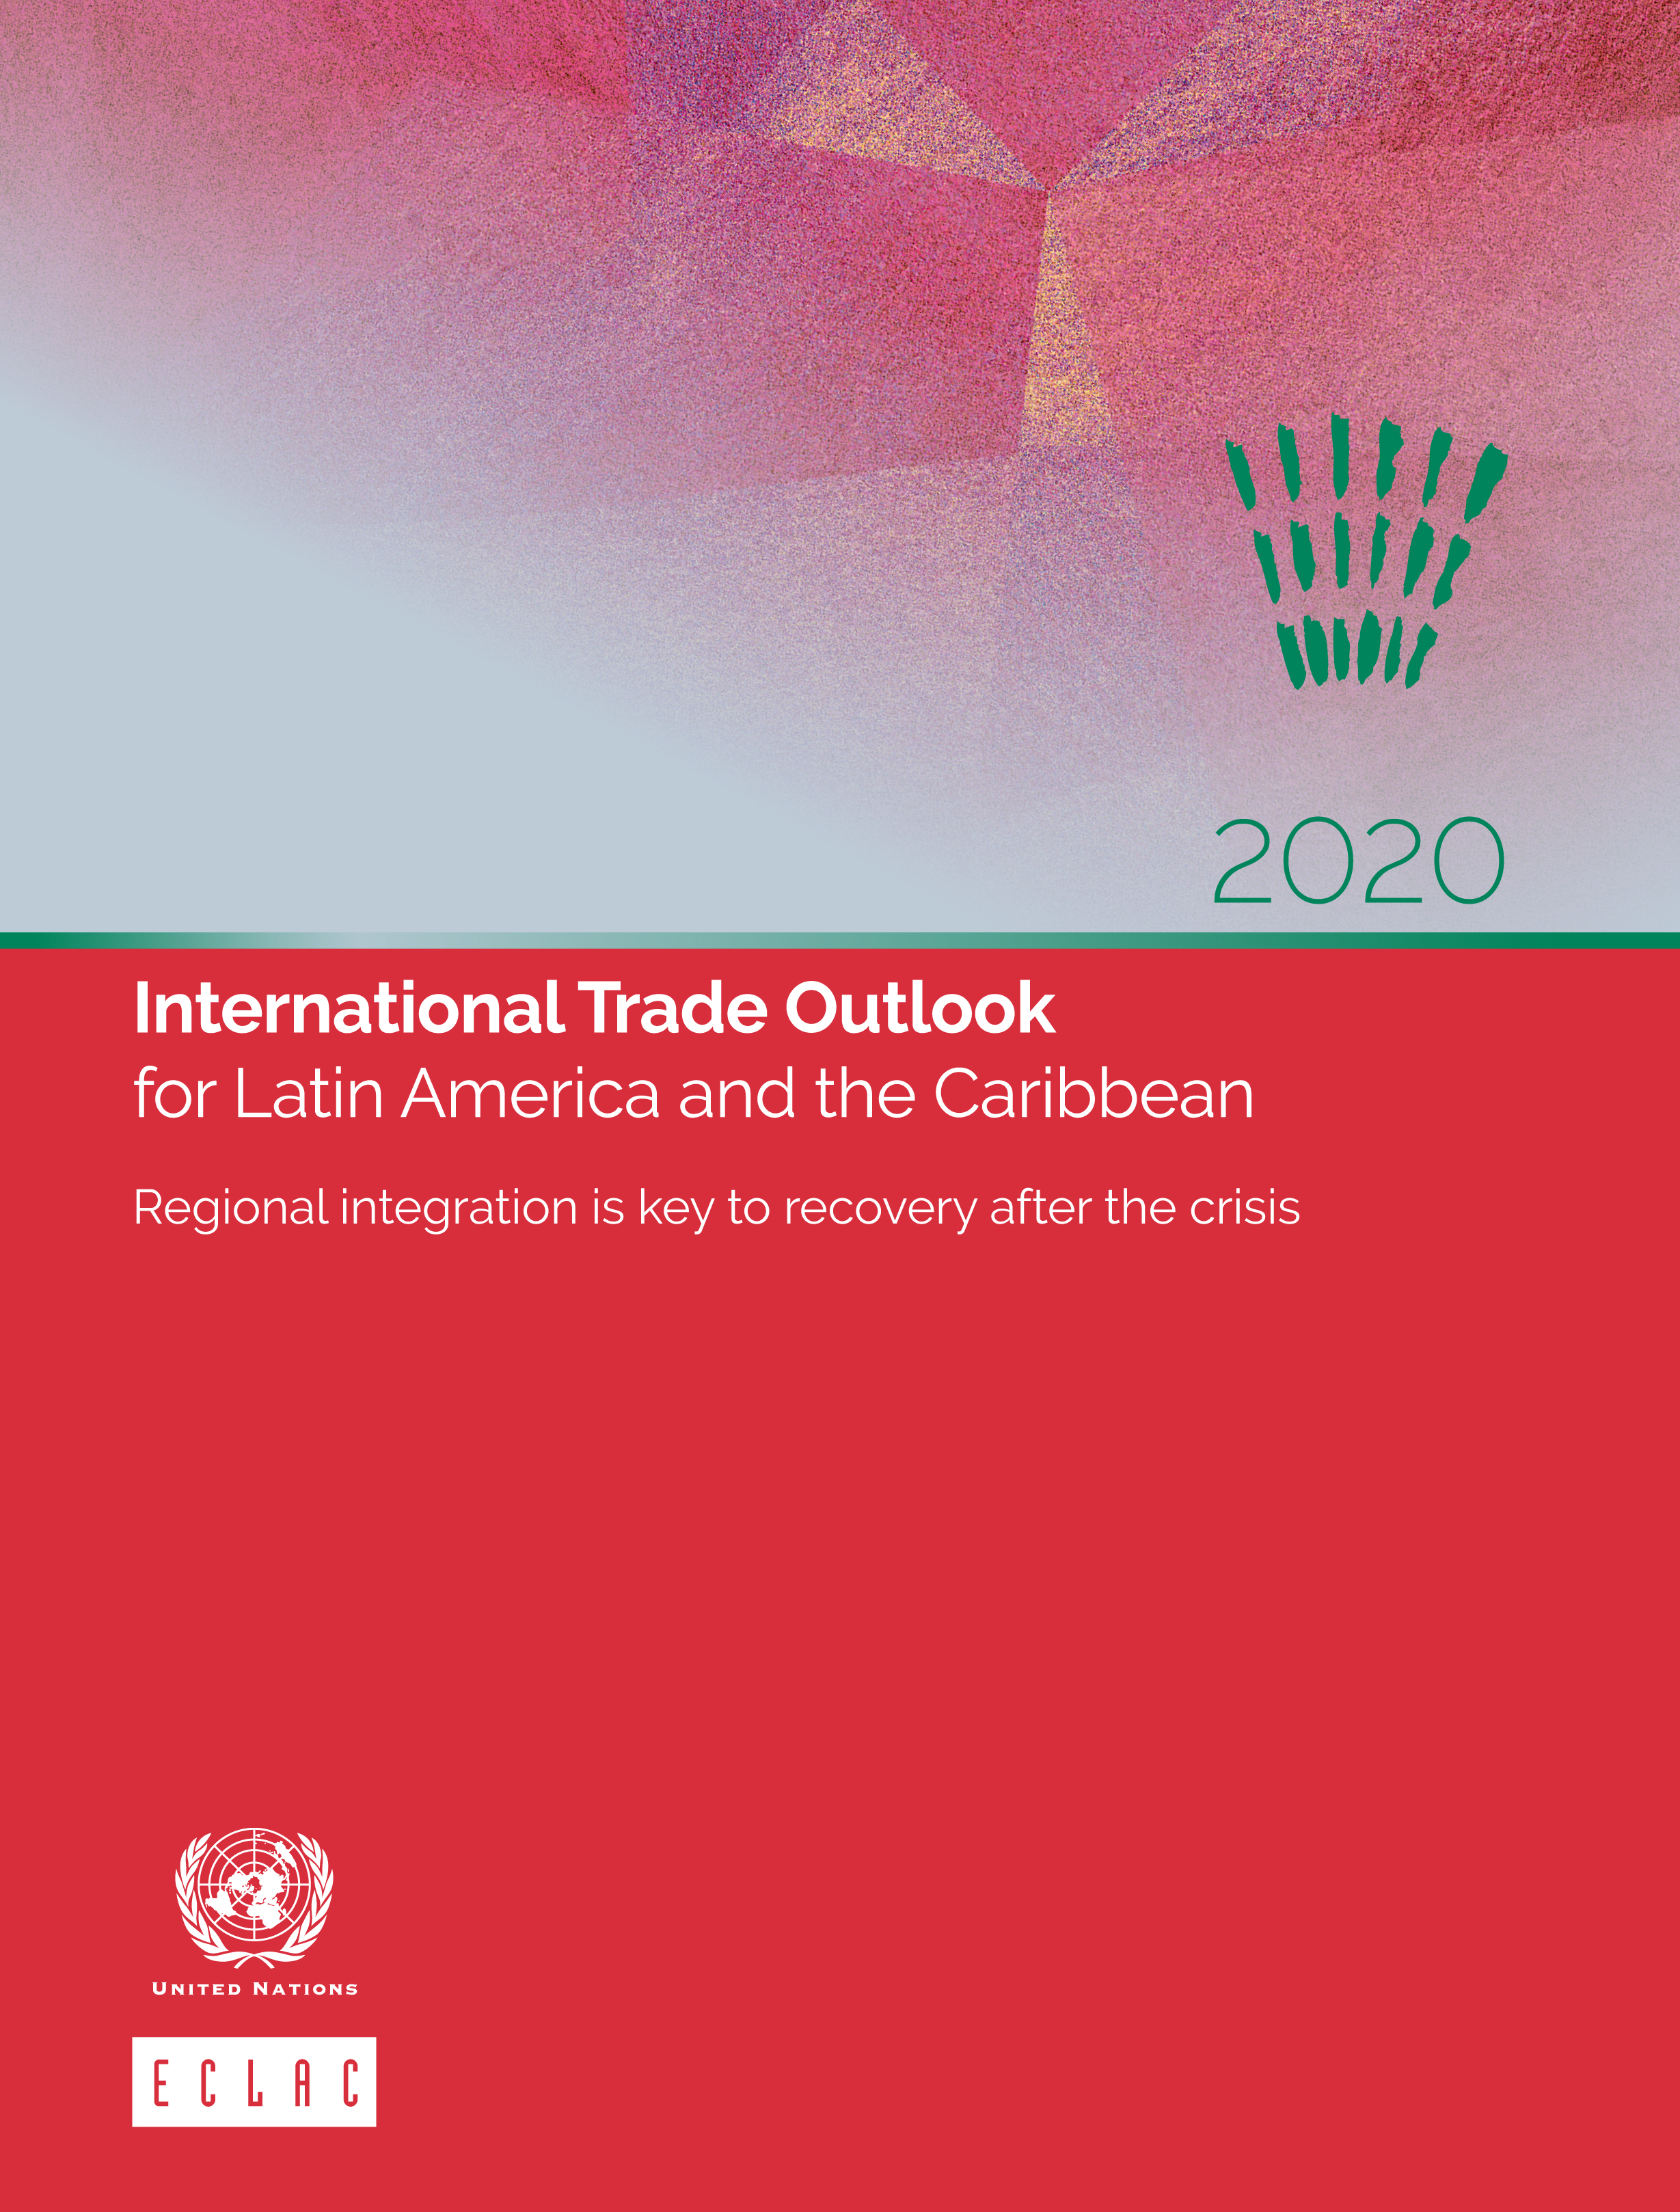 image of International Trade Outlook for Latin America and the Caribbean 2020